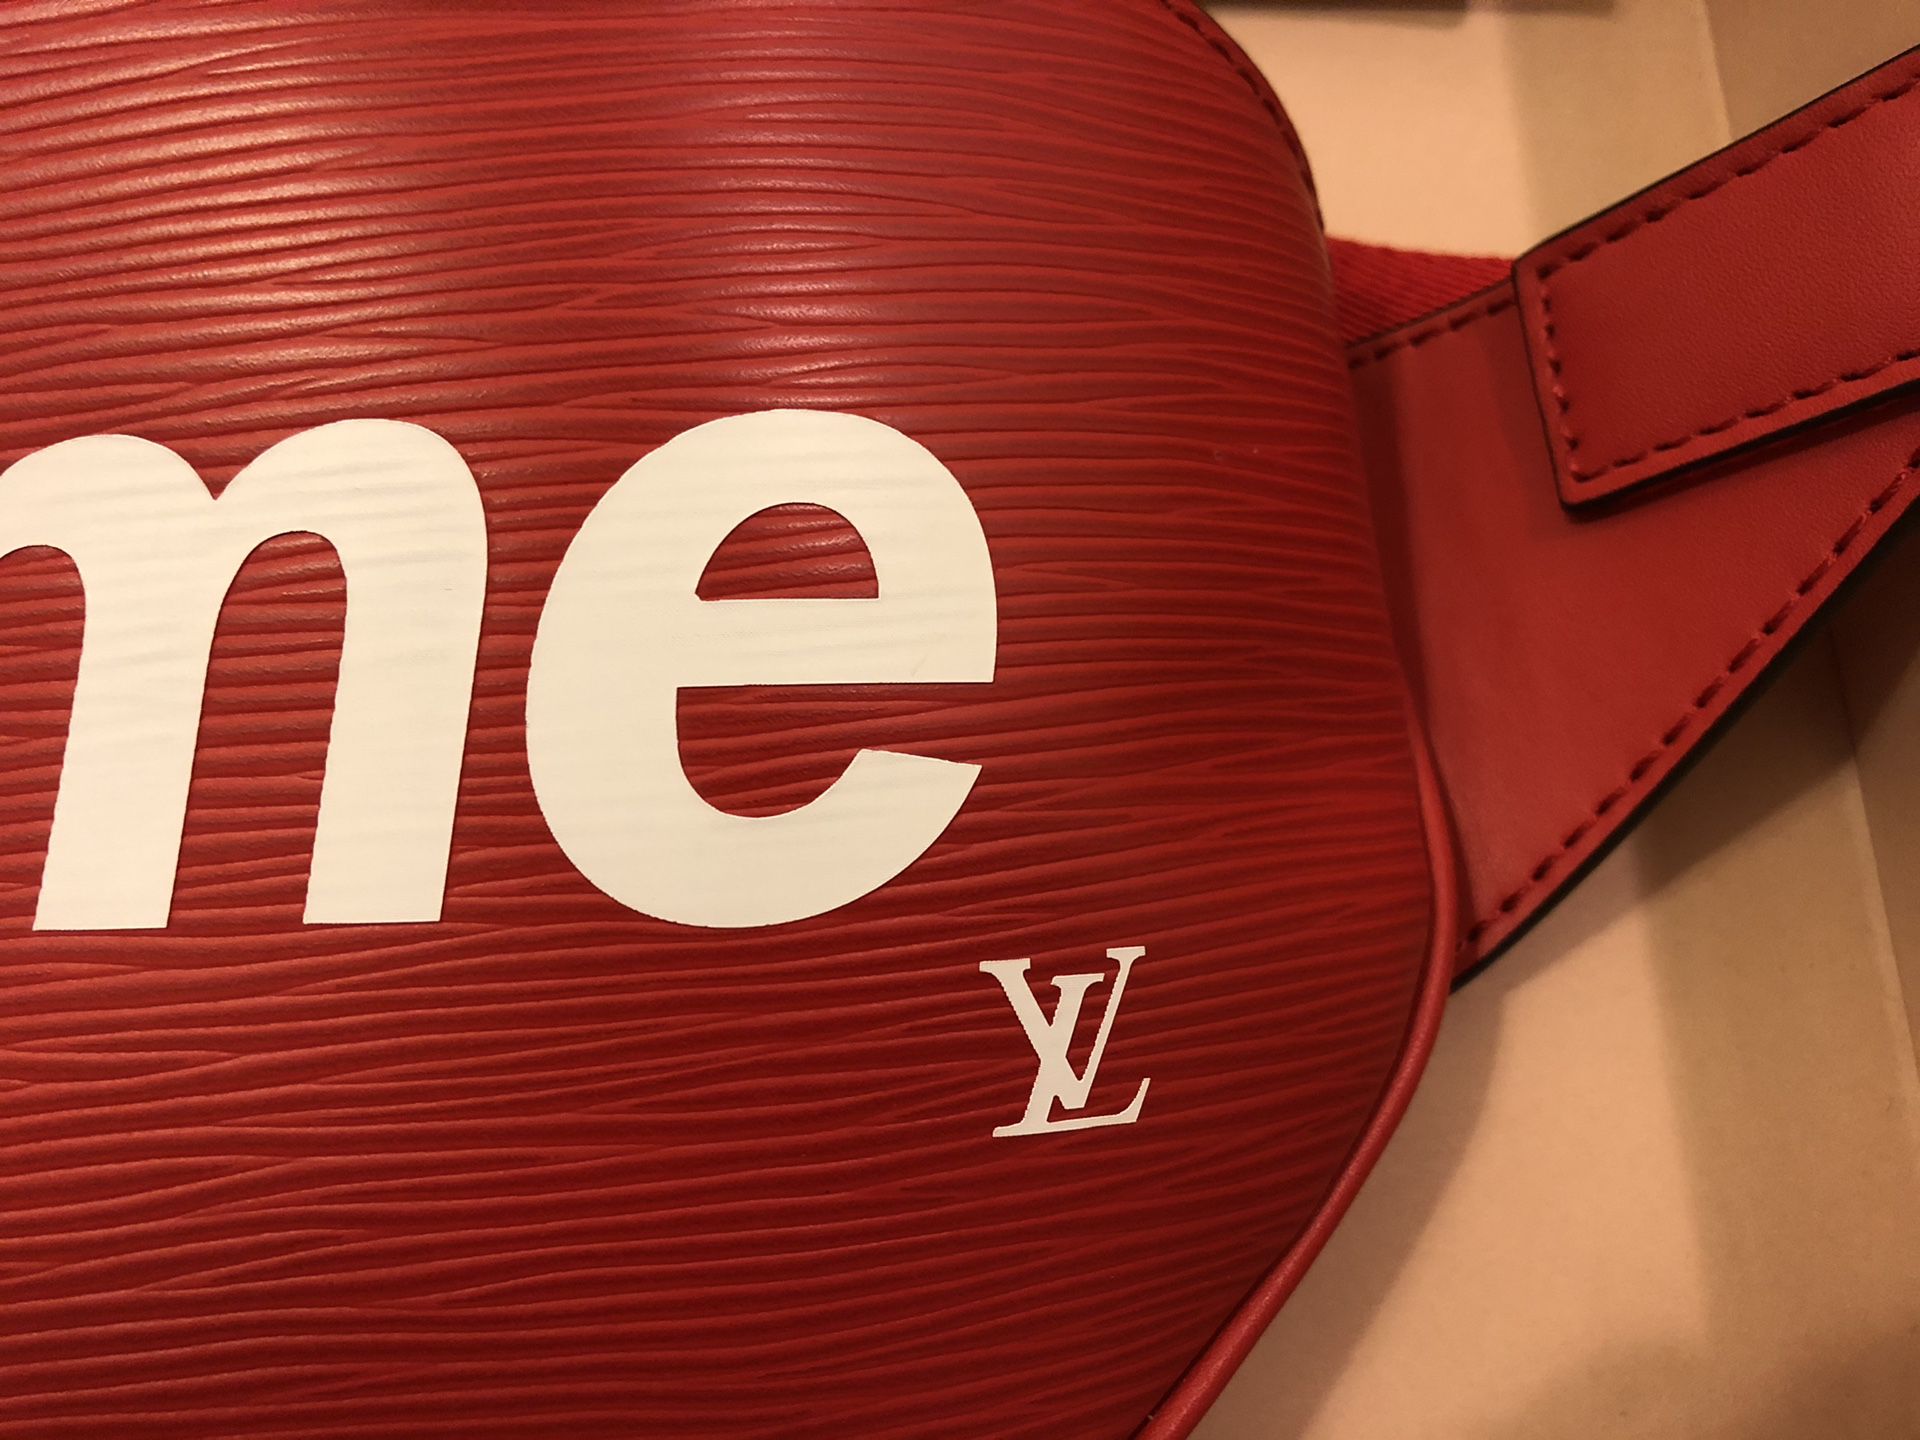 Louis Vuitton X Supreme Bumbag PM Available For Immediate Sale At Sotheby's